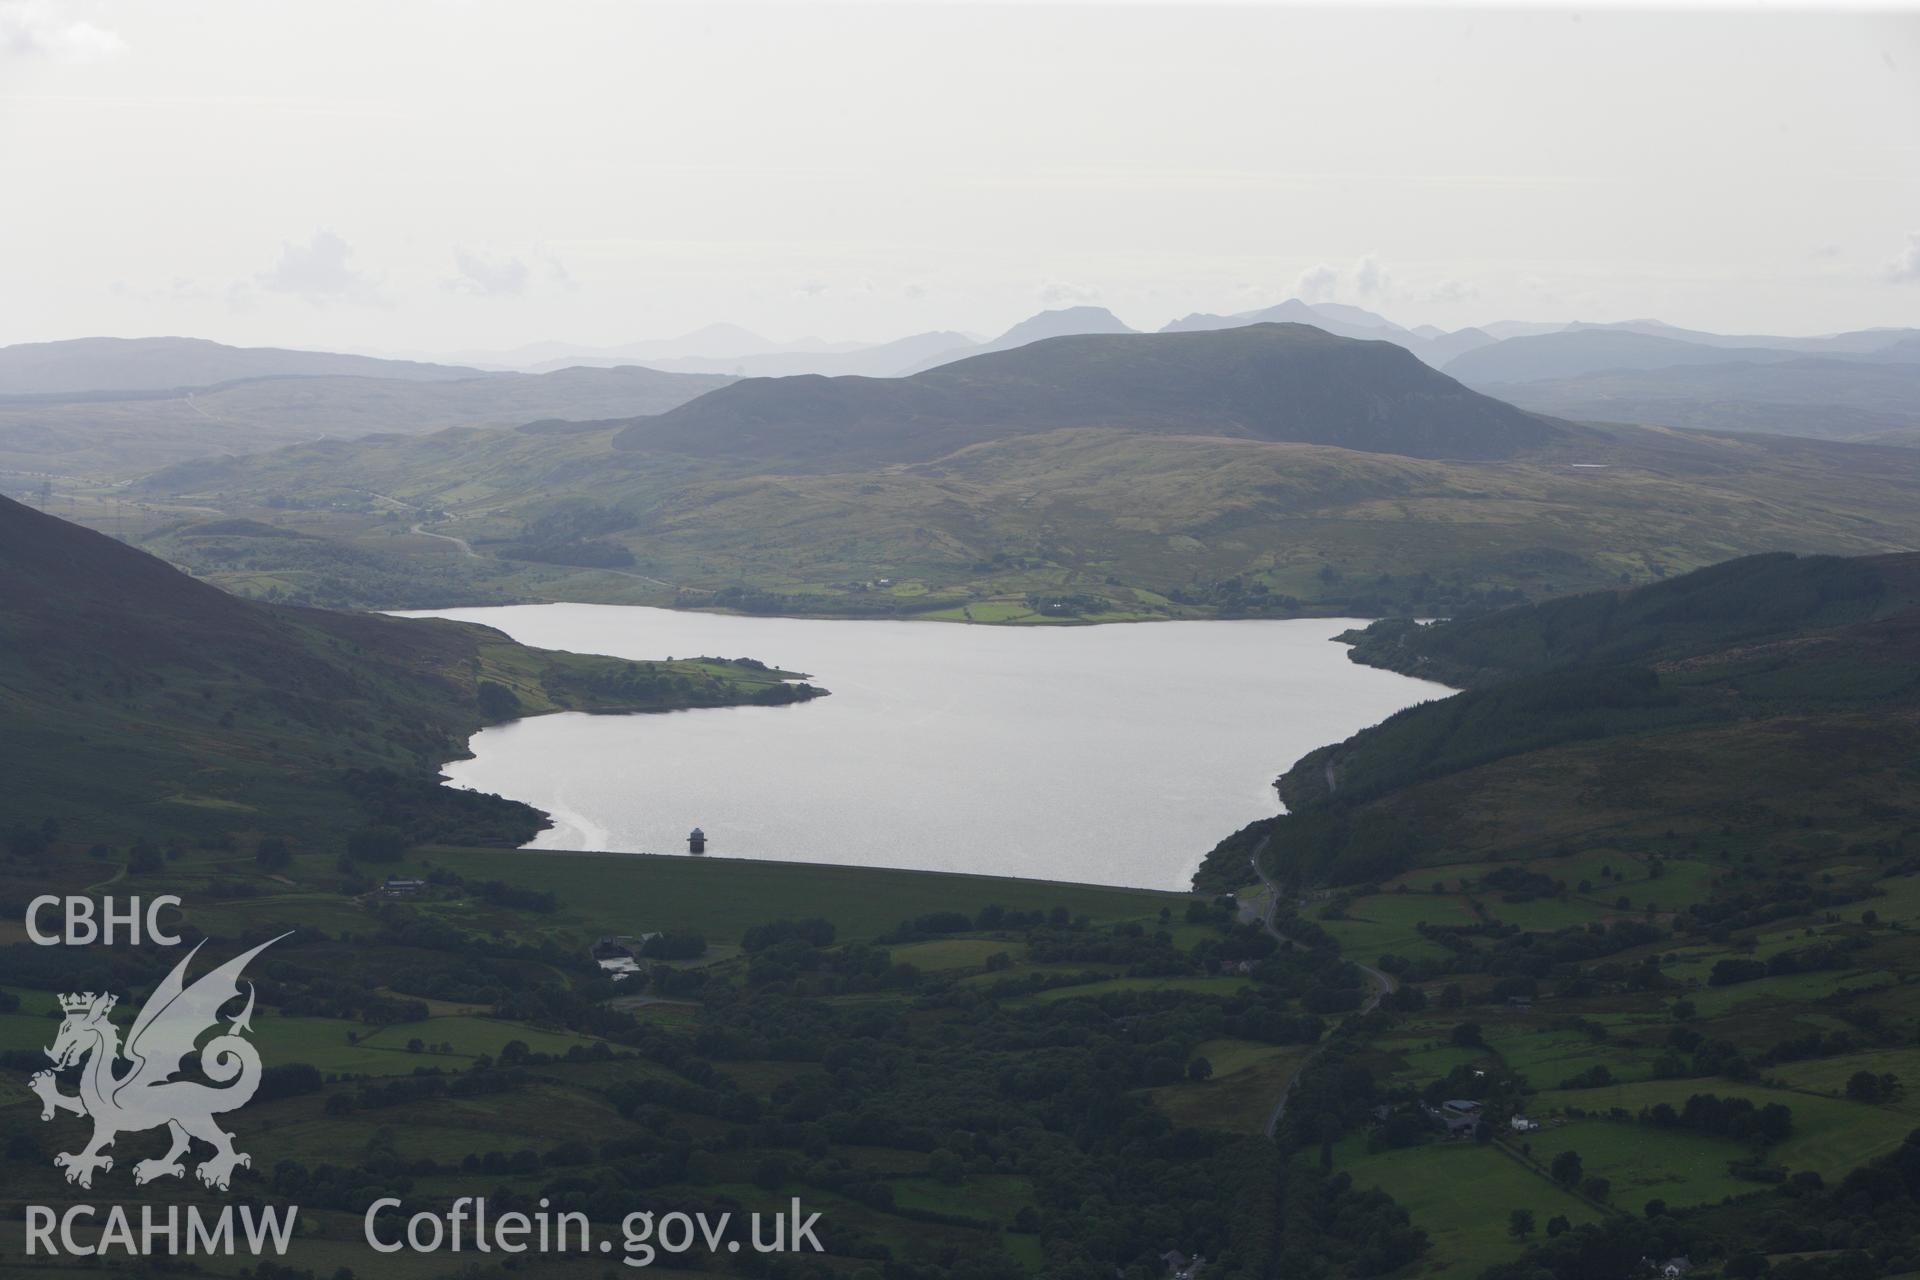 RCAHMW colour oblique aerial photograph of Llyn Celyn, Tryweryn Valley. Taken on 06 August 2009 by Toby Driver